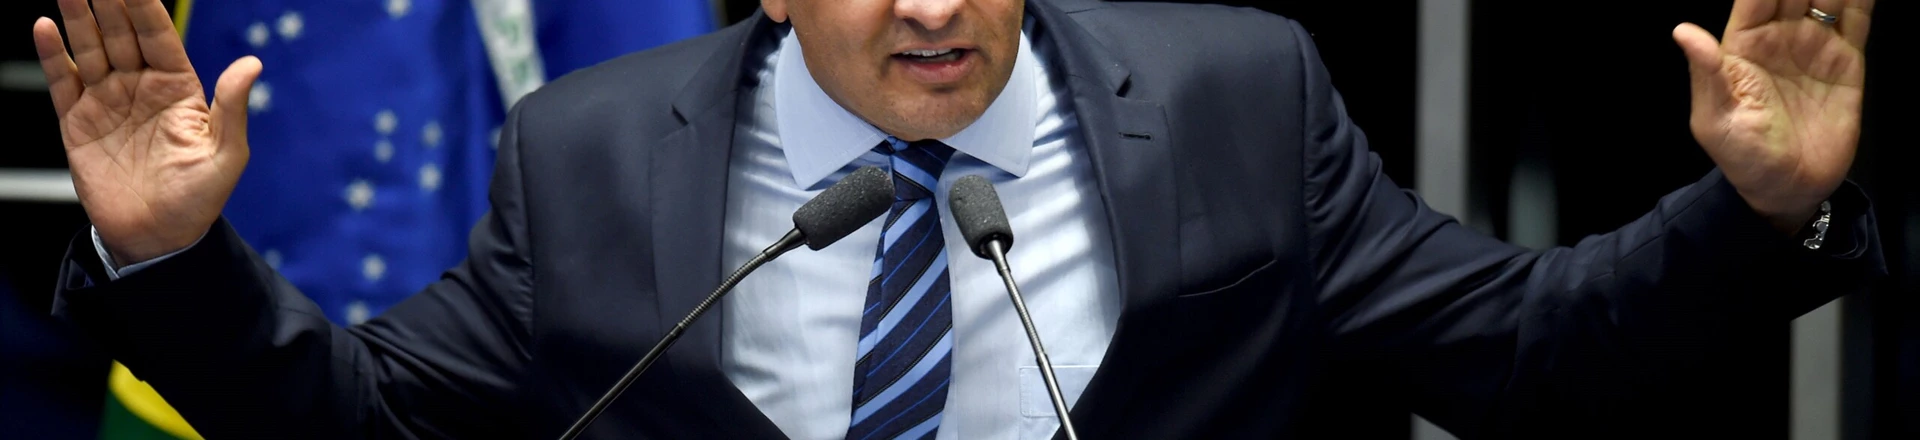 Brazilian senator Aecio Neves, from PSDB, delivers a speech during the debate in the Senate of a vote on suspending President Dilma Rousseff and launching an impeachment trial, in Brasilia on May 11, 2016. A simple majority in the 81-member Senate will trigger Rousseff's six-month suspension pending trial. A two-thirds majority would then be needed to remove her permanently. / AFP / EVARISTO SA (Photo credit should read EVARISTO SA/AFP/Getty Images)